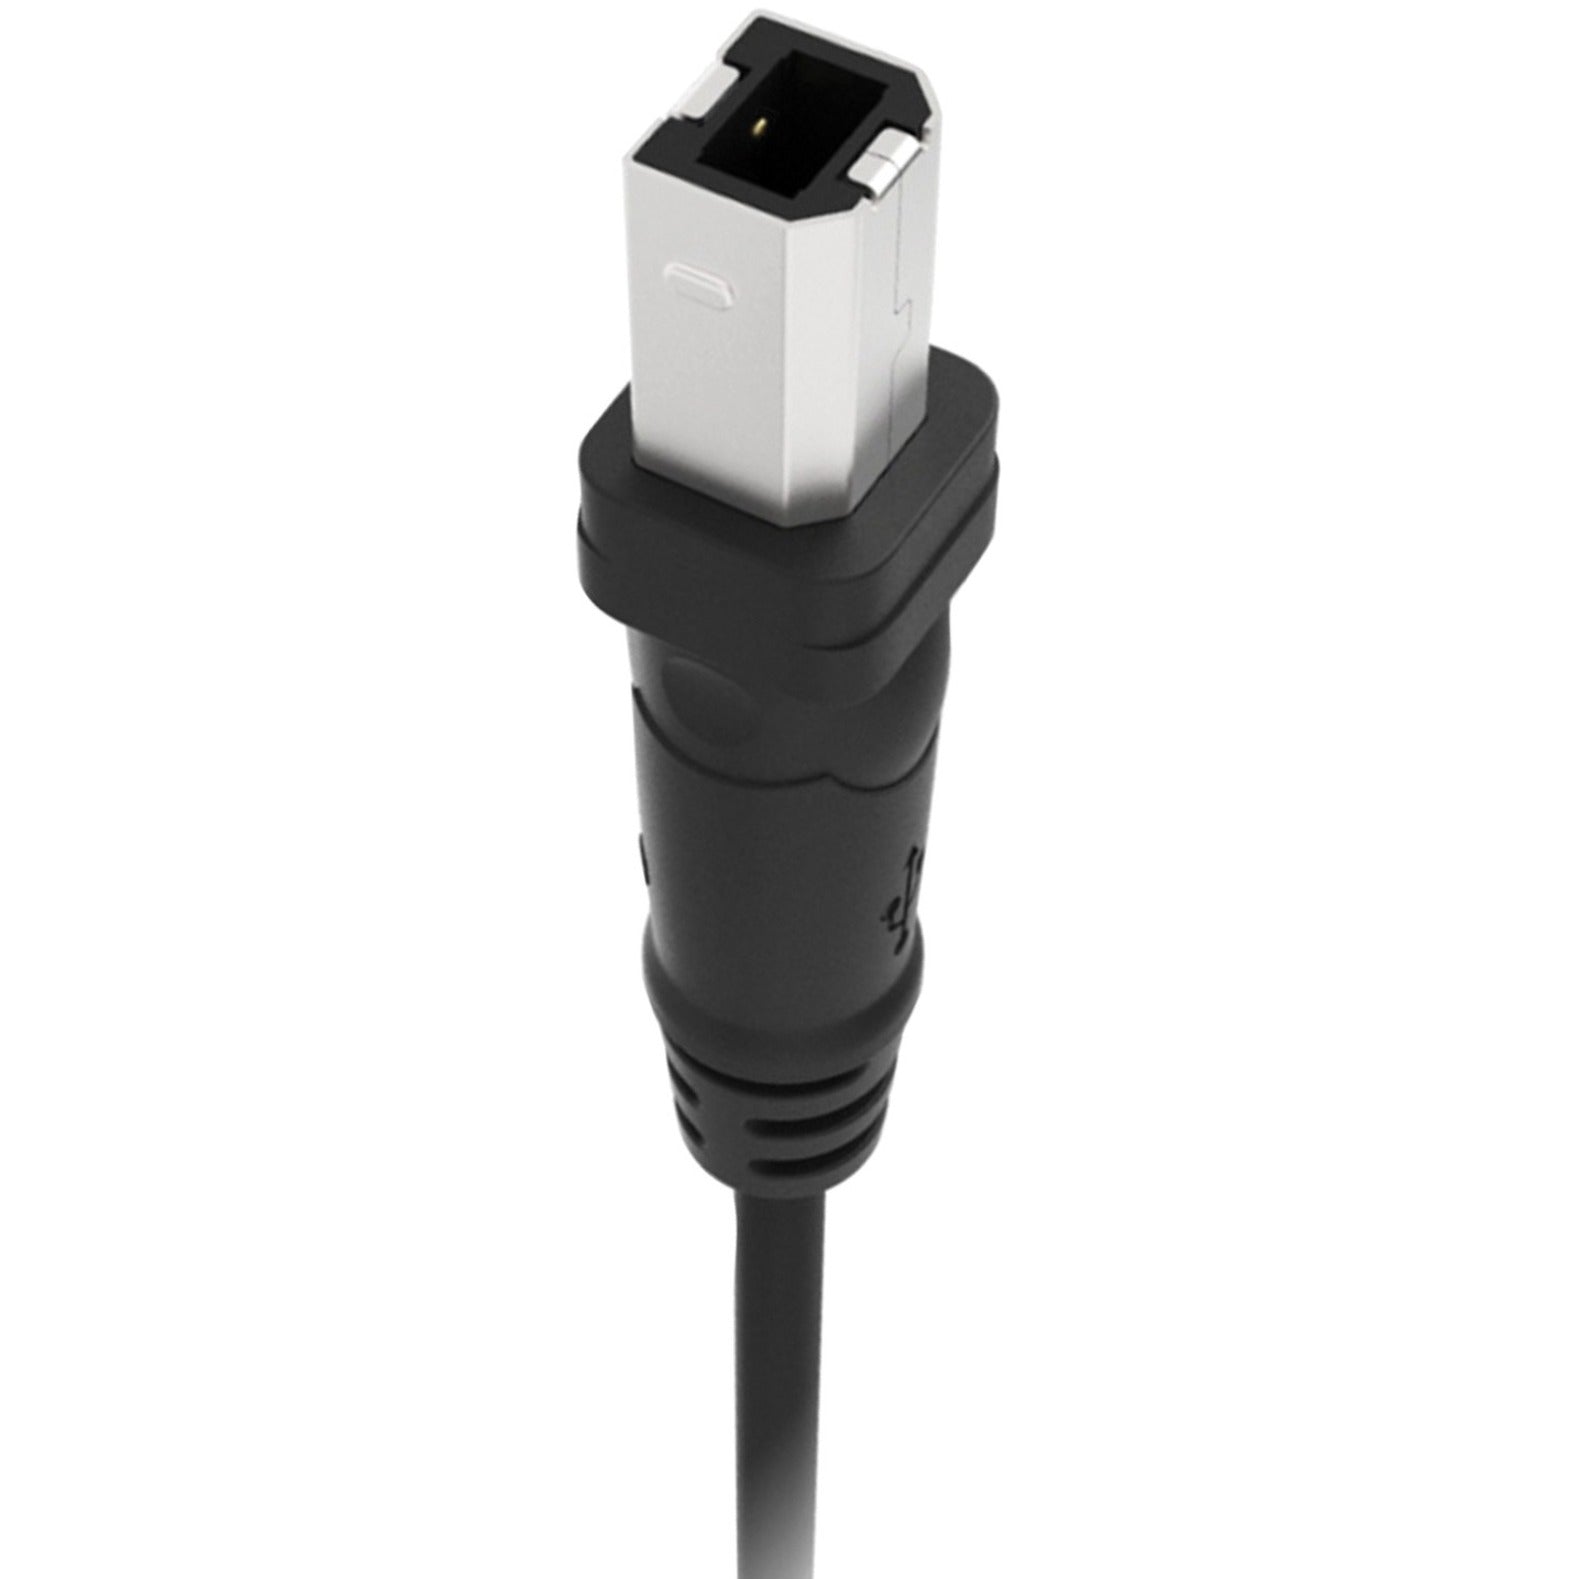 Belkin F3U133B10 USB Cable, 10 ft Data Transfer Cable